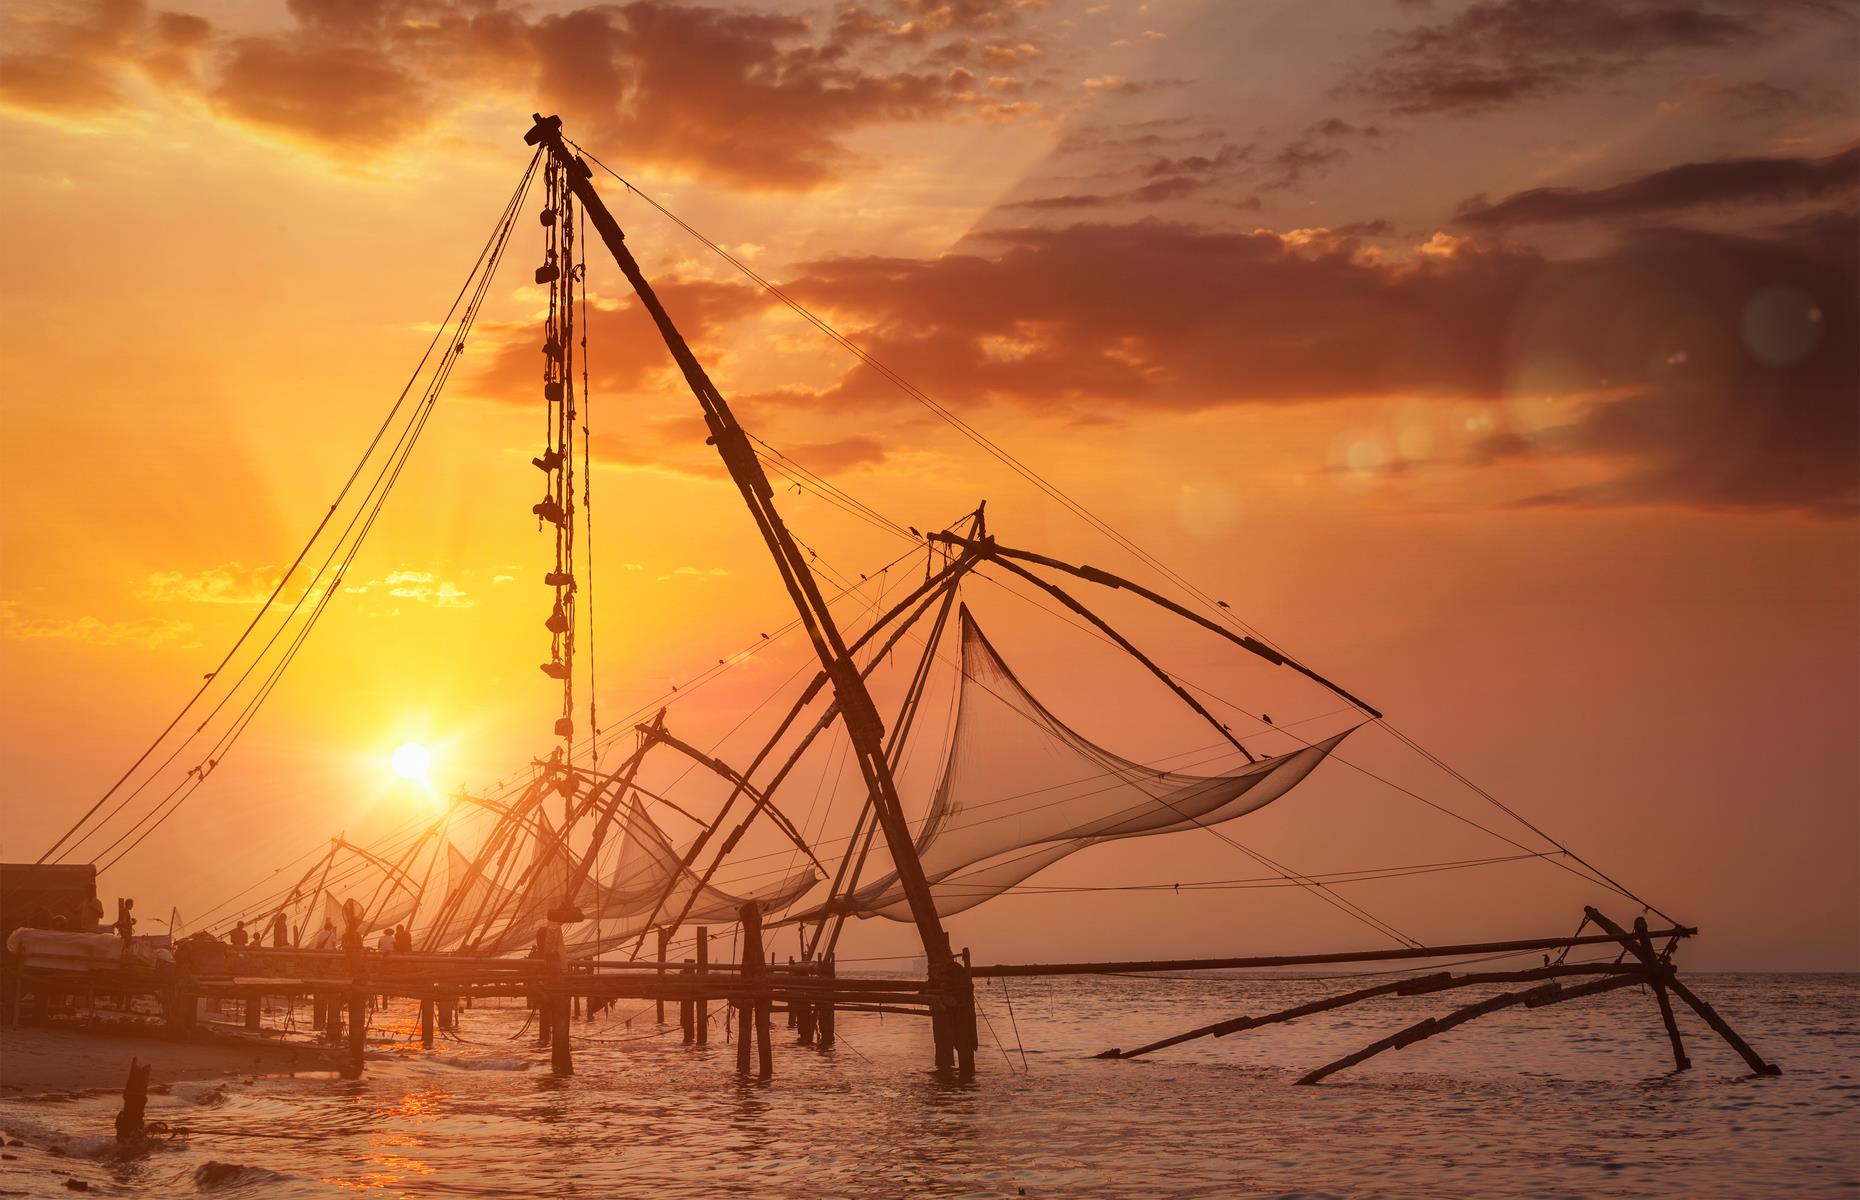 <p>This charming old spice port has a historic fort, India's oldest European church (St Francis), fragrant spice markets, and a clutch of plush hotels. But it's Kochi's striking fishing nets dotted along the harbor that are its most famous and photographed sight.</p>  <p>These giant hammock-like contraptions were introduced by Chinese traders more than 400 years ago and are still used by local fishermen. Watch them rise and dip as the sun sets on the Arabian Sea.</p>